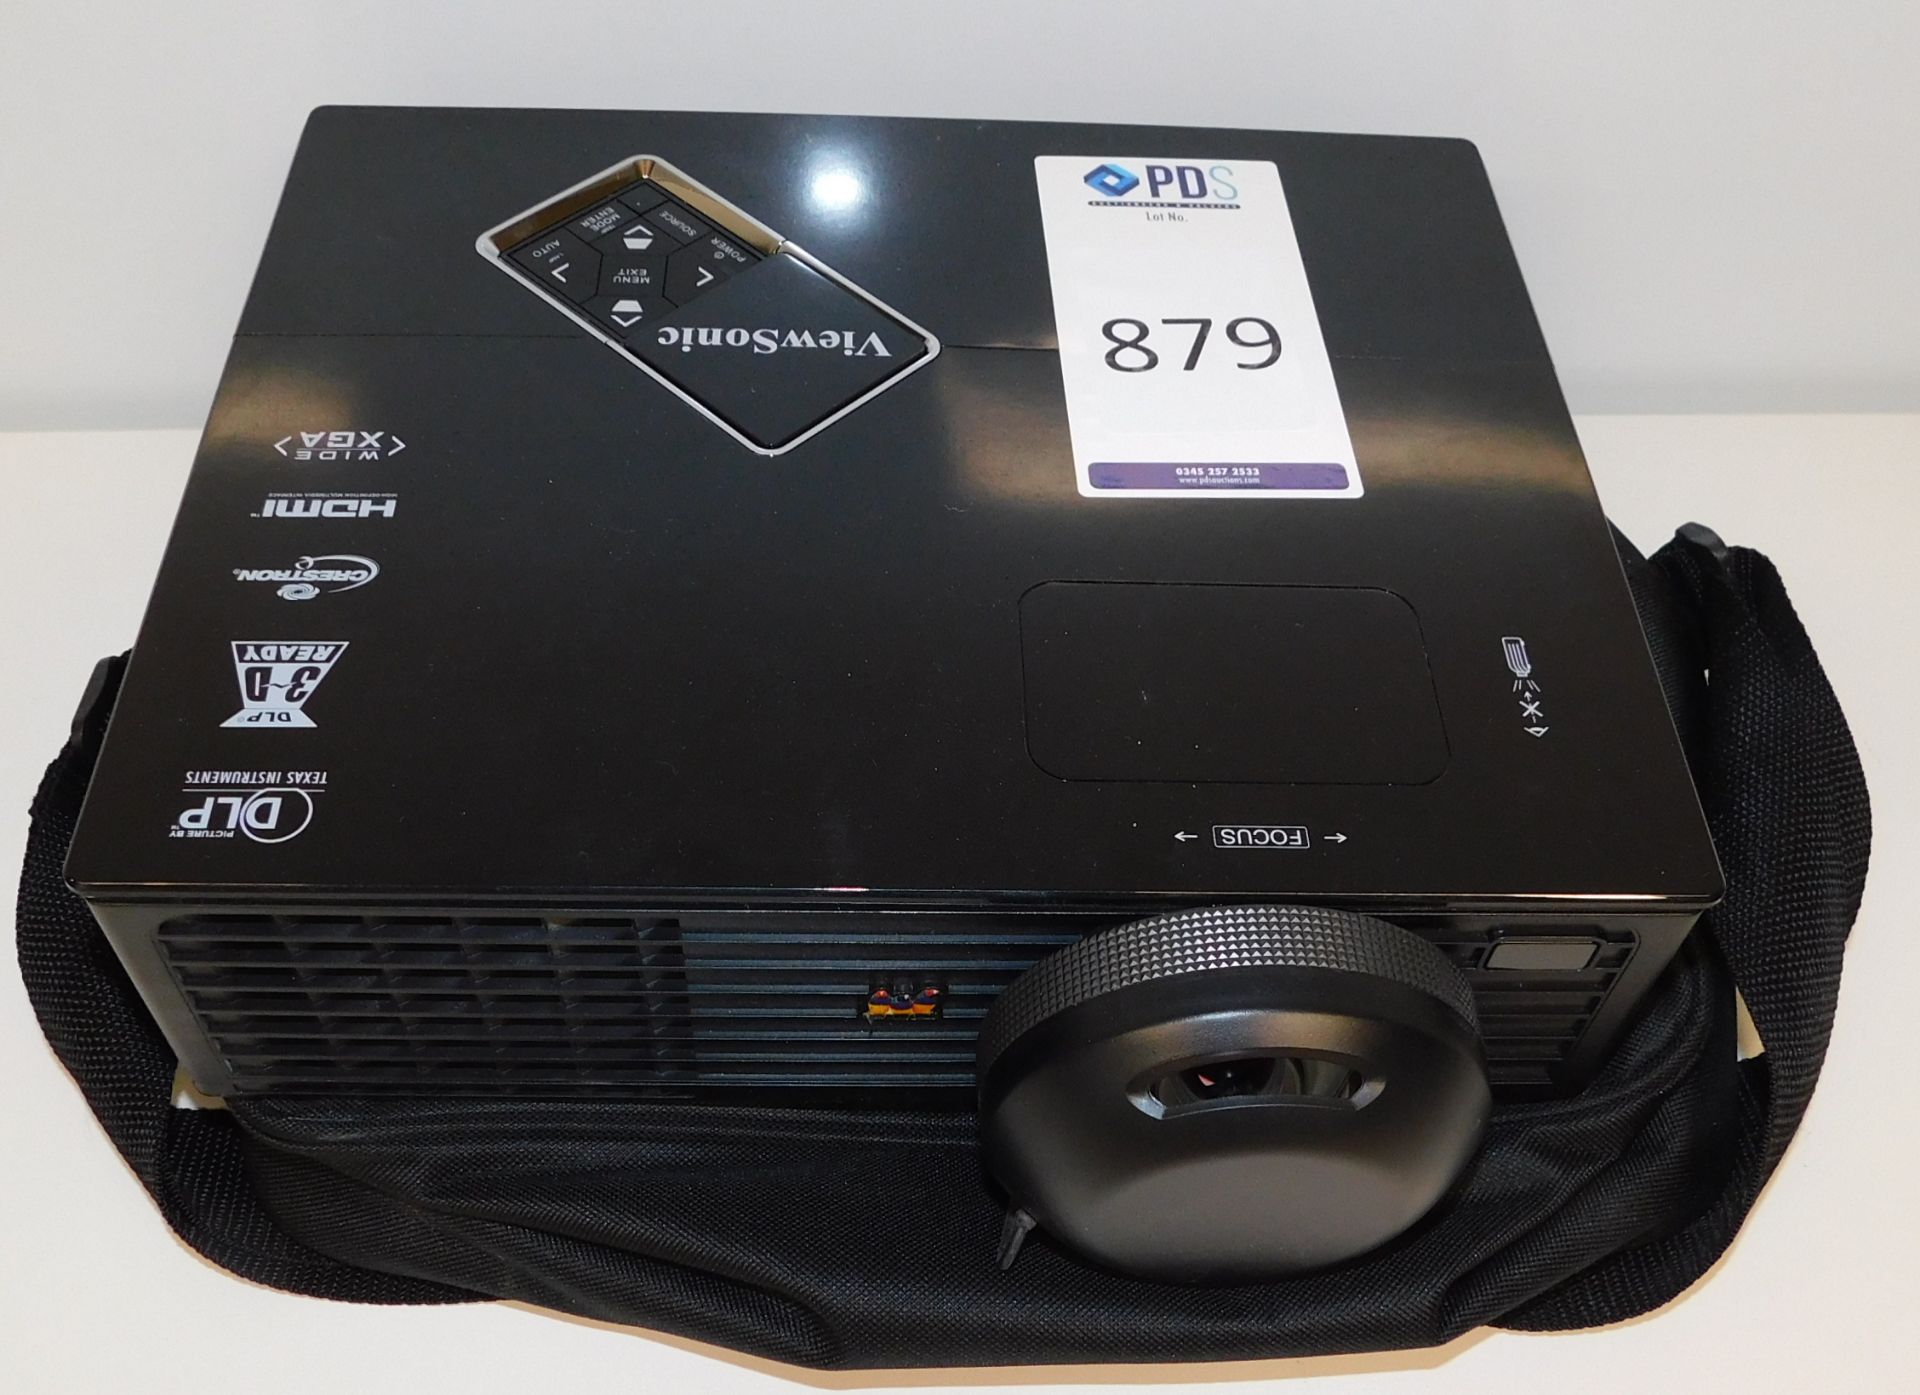 ViewSonic PJD6683w Projector (Located Manchester – See General Notes for More Details)